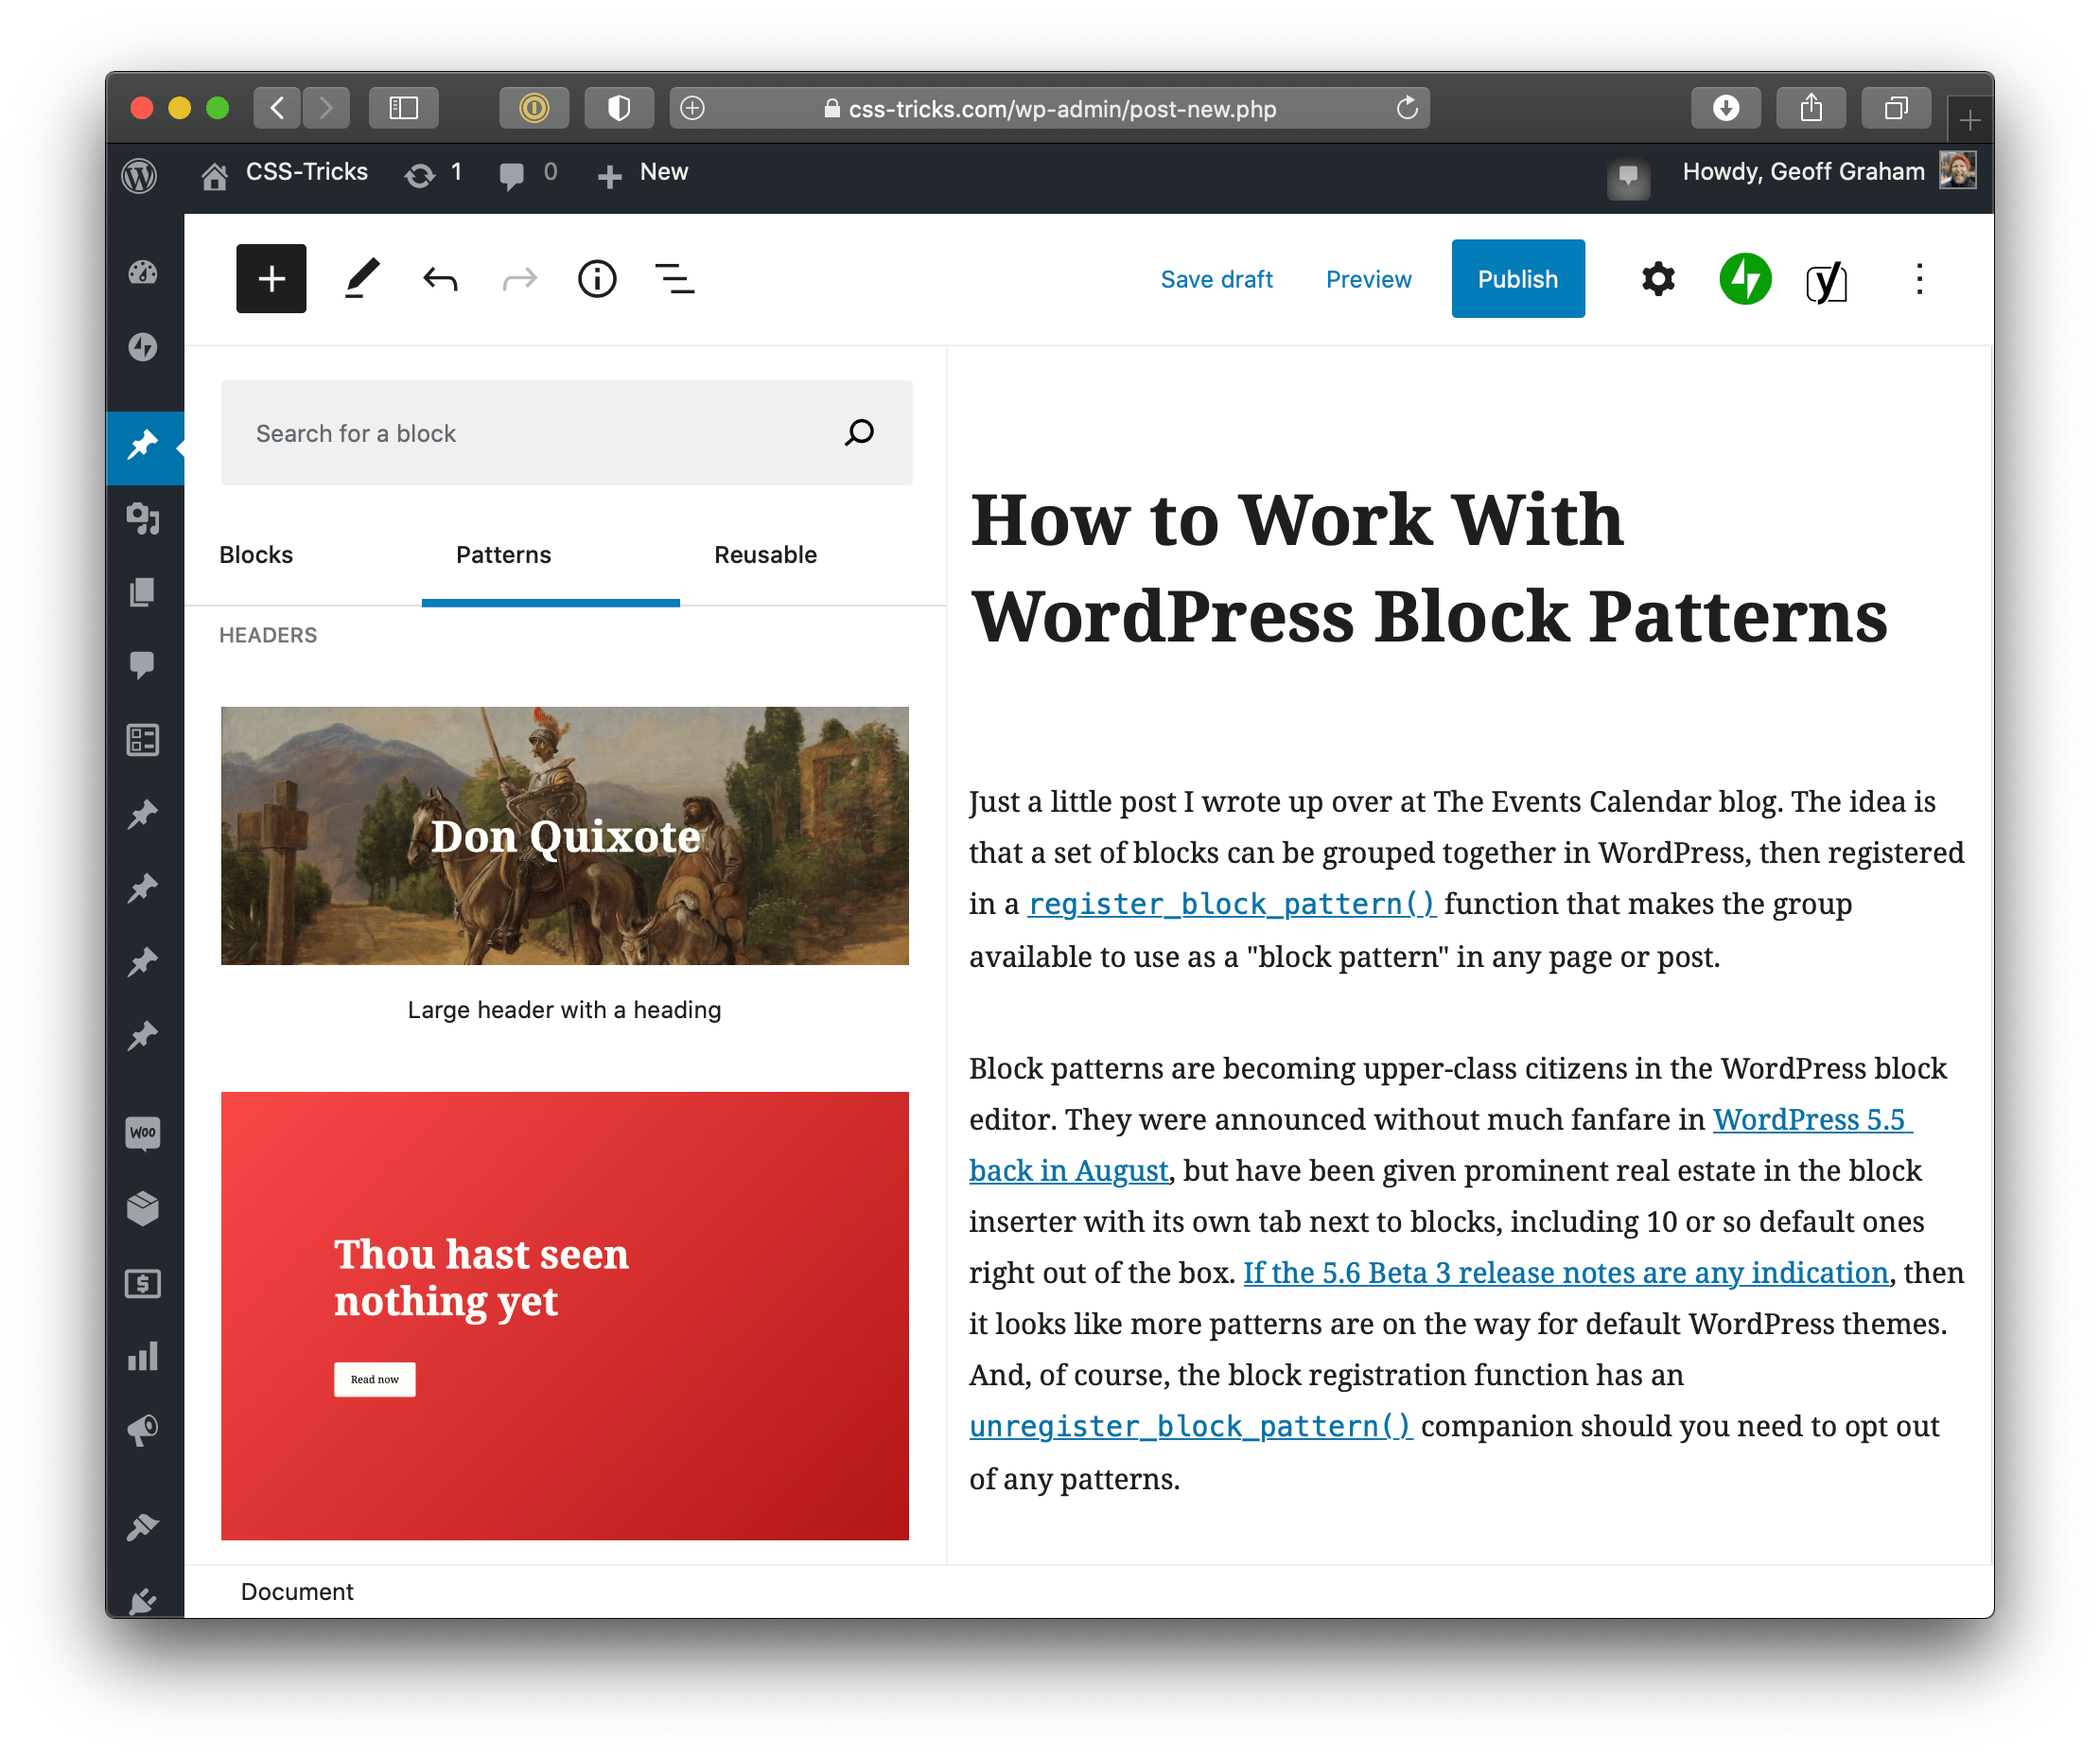 Full page screenshot of the WordPress post editor. On the right is the post content, which includes a large bold title in black above two paragraphs. On the left is the block inserter expanded with the Patterns tab active and displaying two options for header patterns.